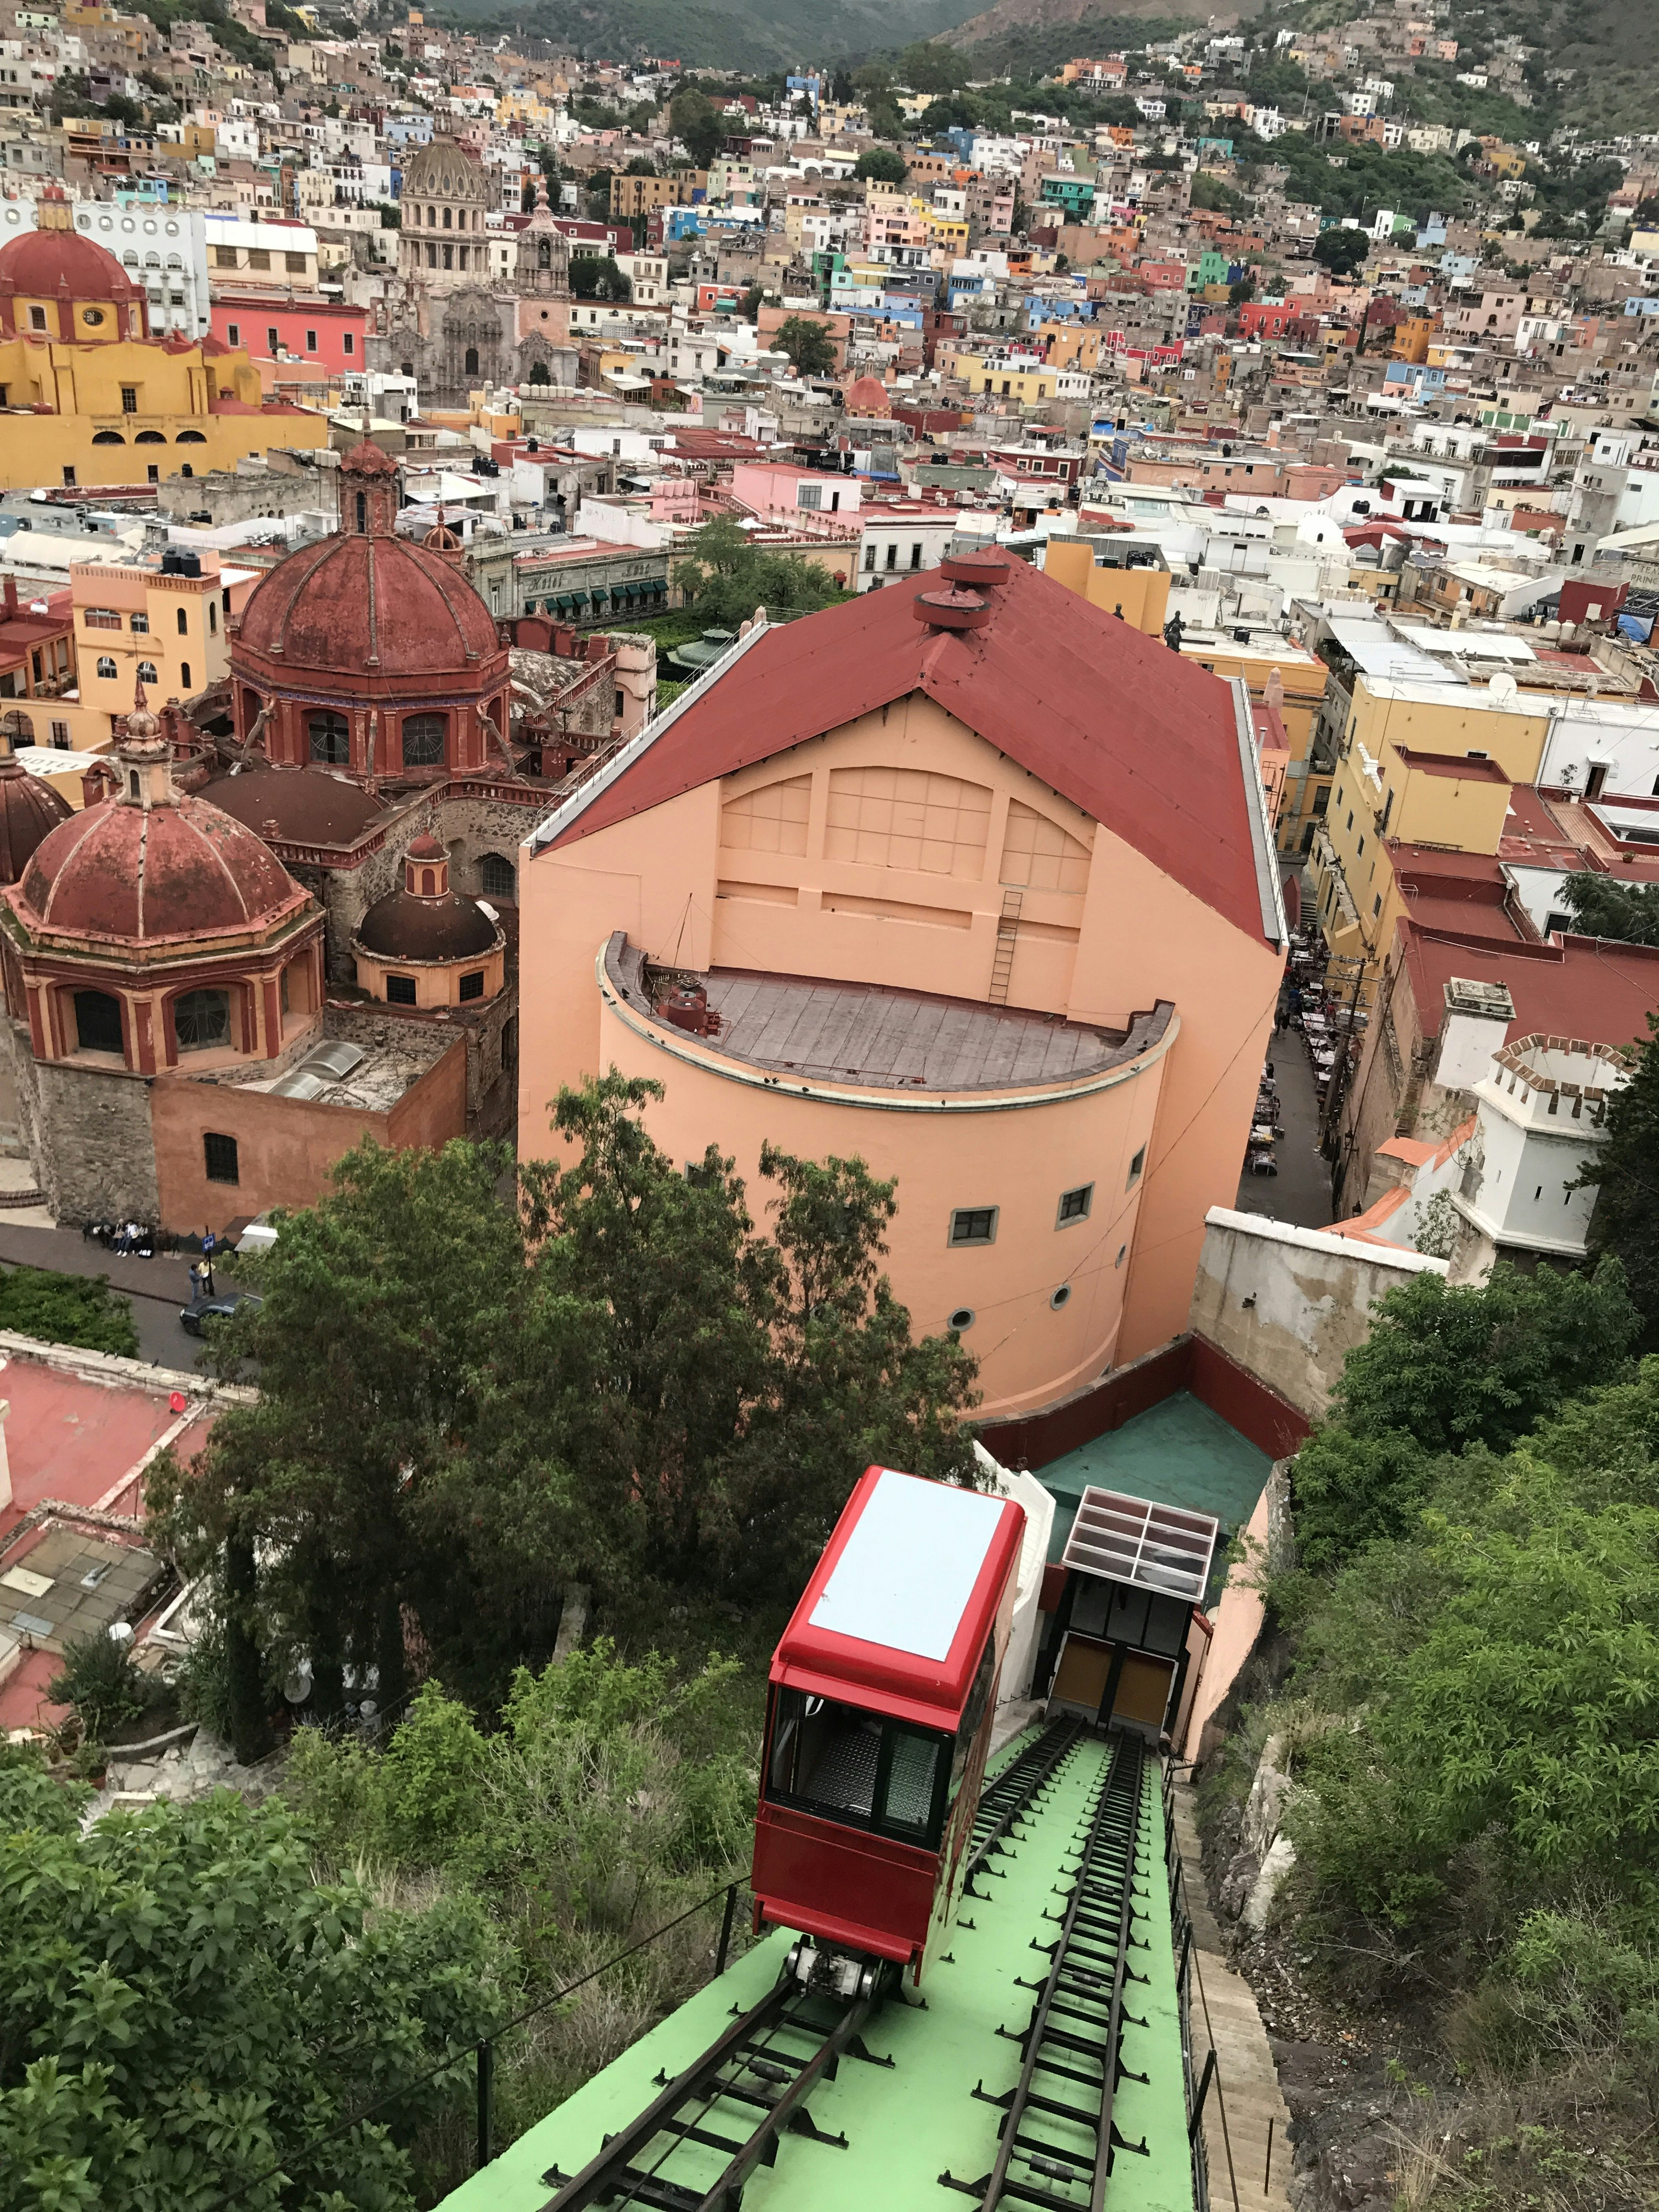 A view of Guanajuato and the funicular